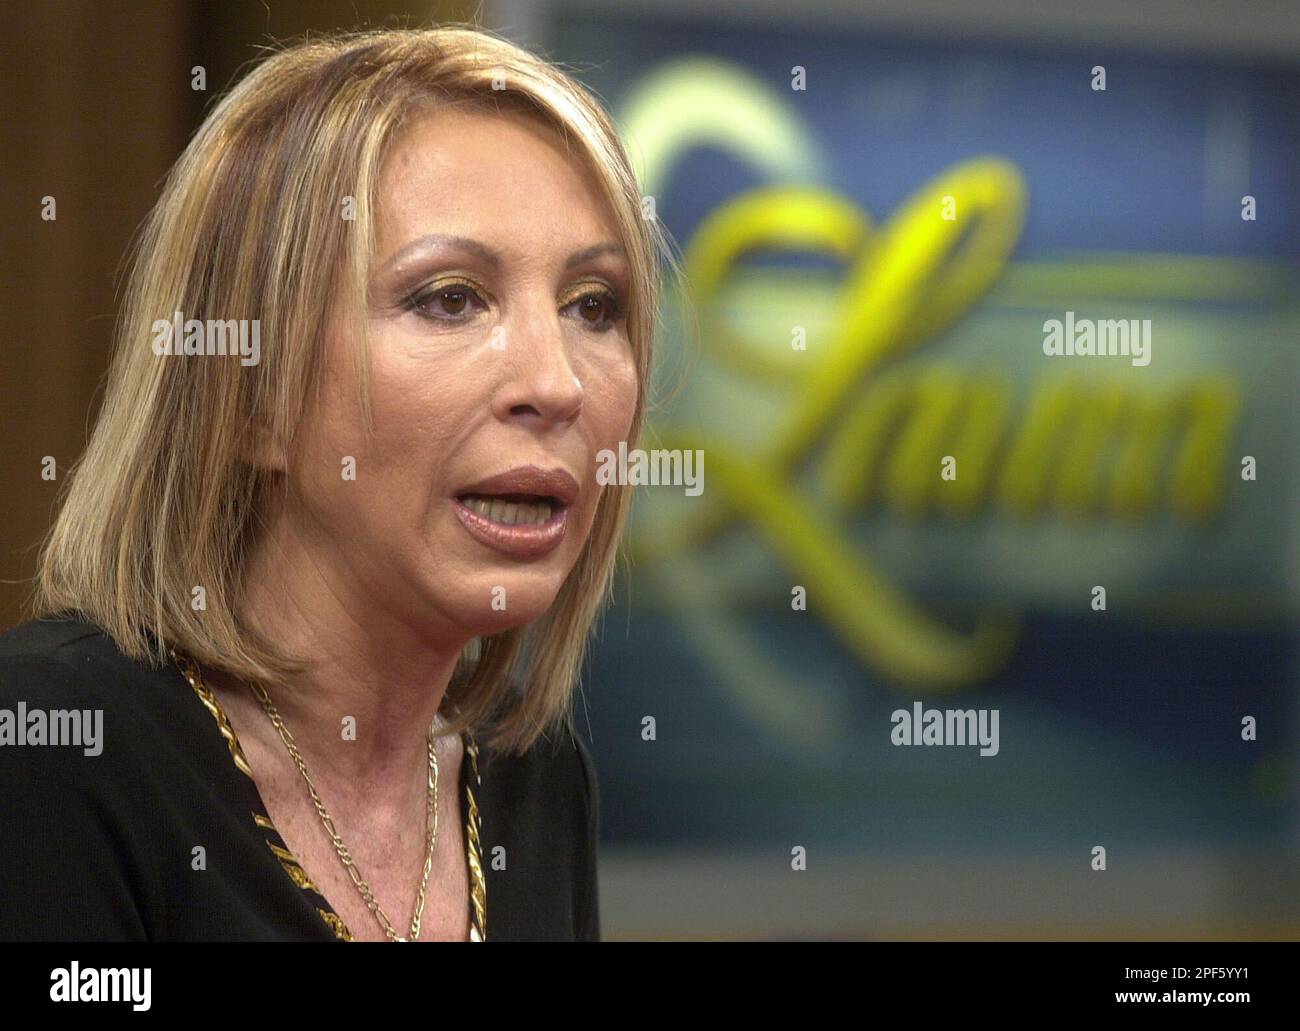 Peruvian television host Laura Bozzo, whose Laura show is a hit on the  No. 2 U.S. Spanish language network Telemundo, talks with reporters in  Lima, Peru on Tuesday, July 22, 2003. Bozzo